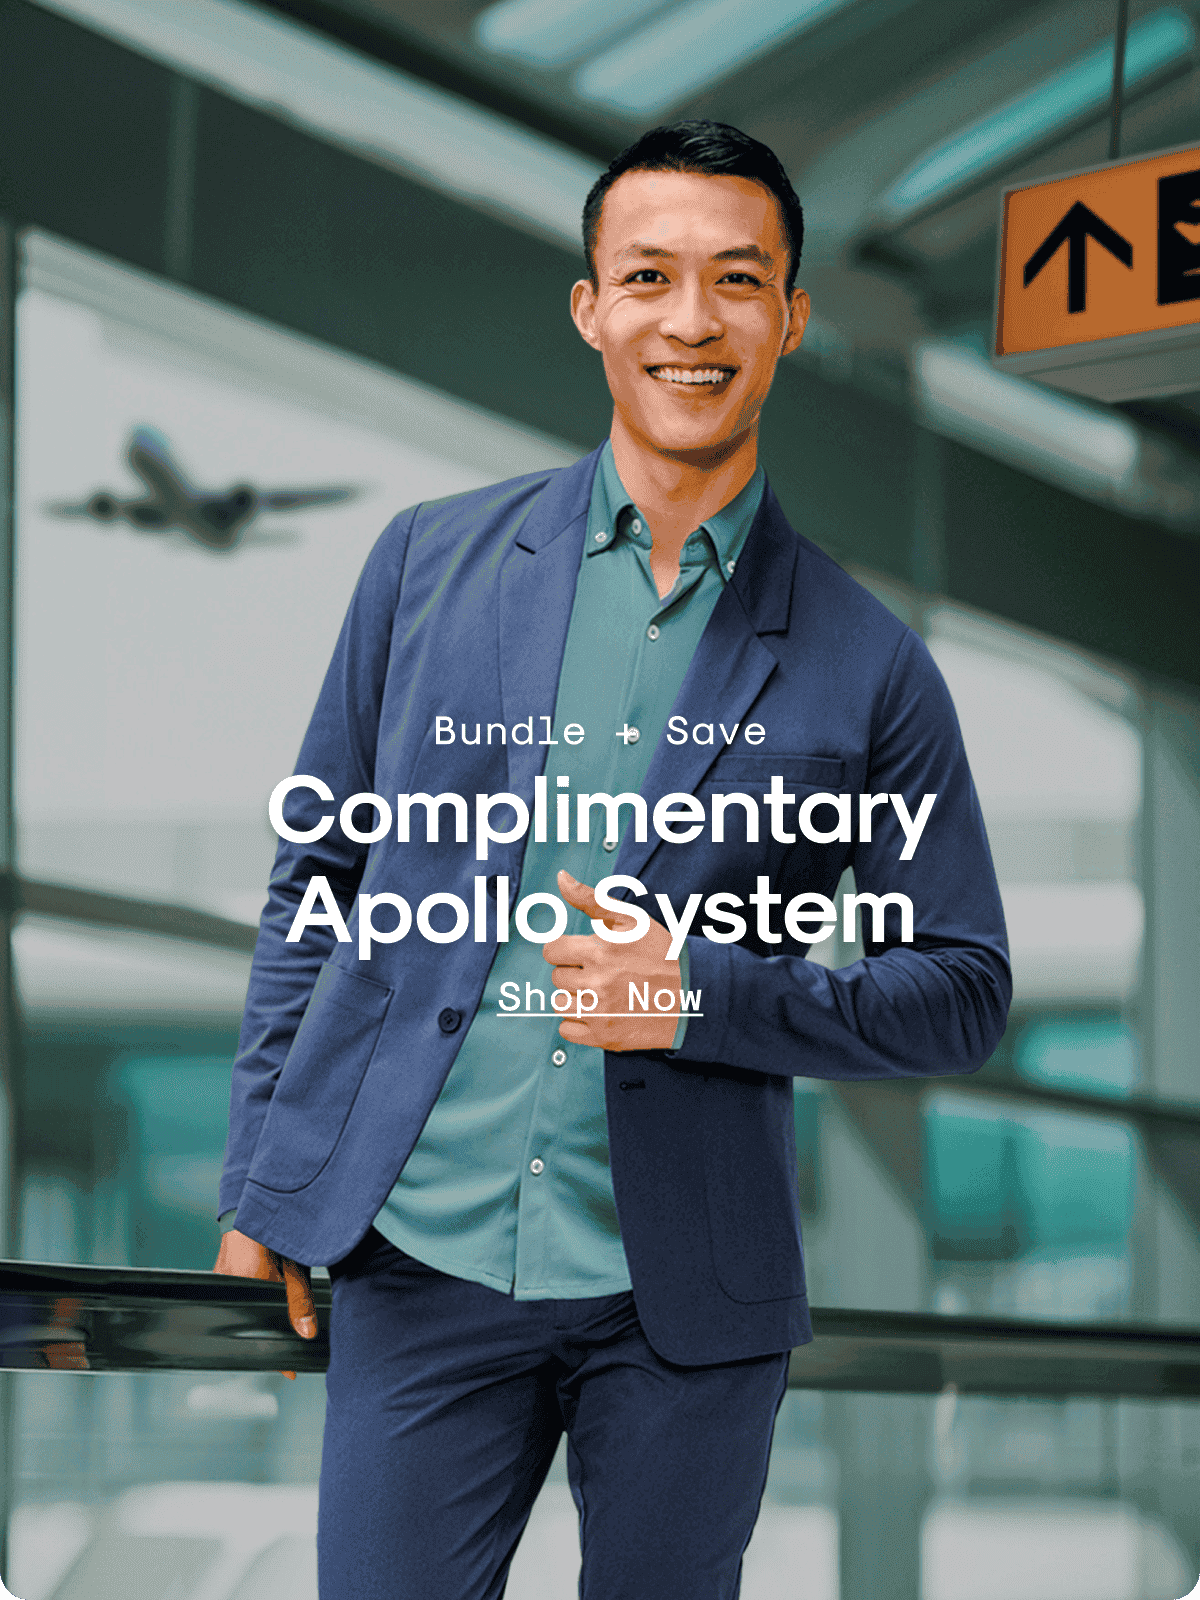 Bundle + Save: Complimentary Apollo System